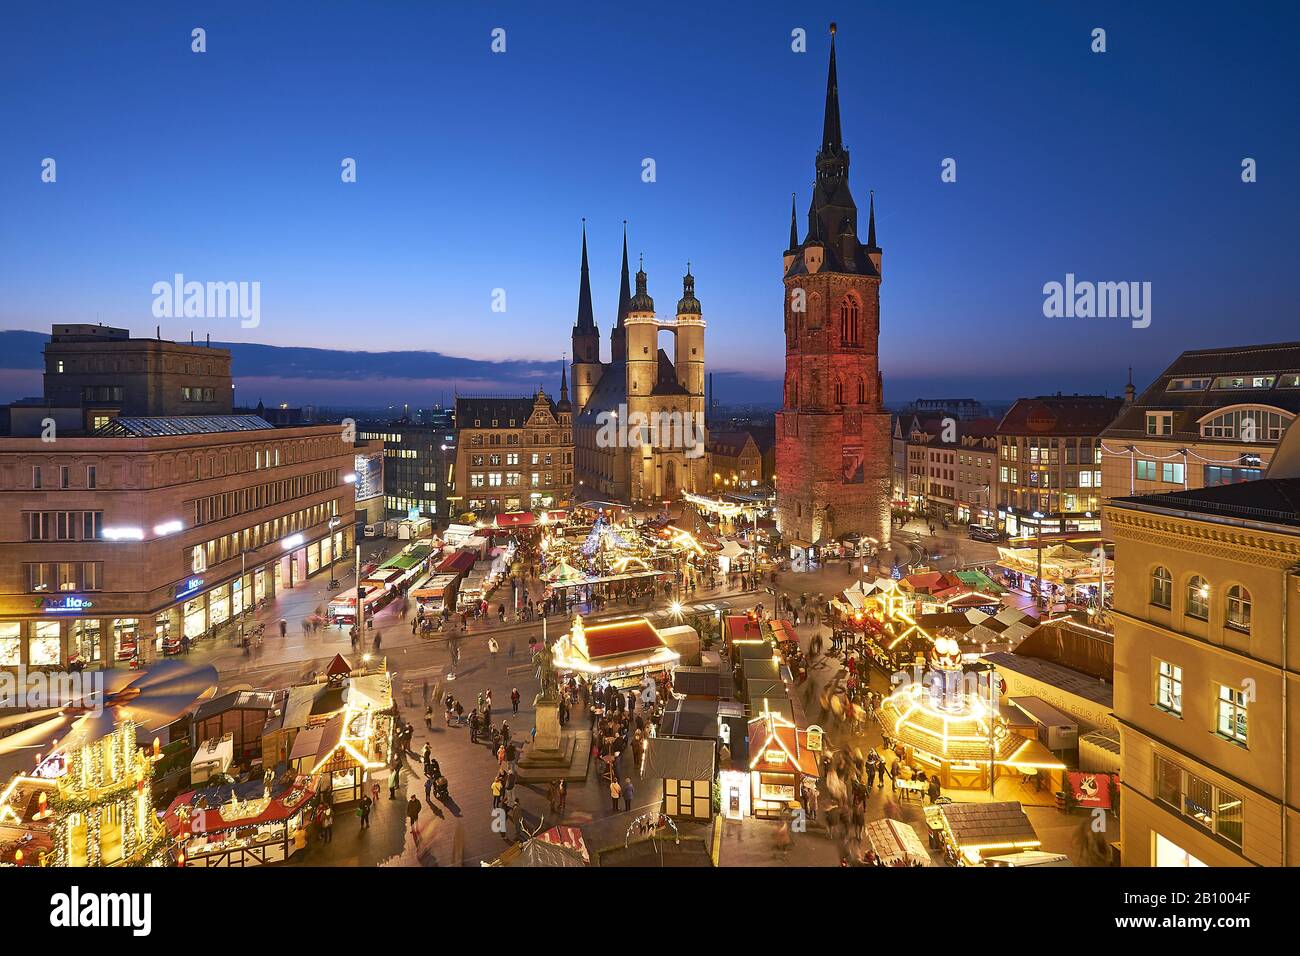 Christmas market with Marktkiche St. Marien and Roter Turm in Halle / Saale, Saxony-Anhalt, Germany Stock Photo